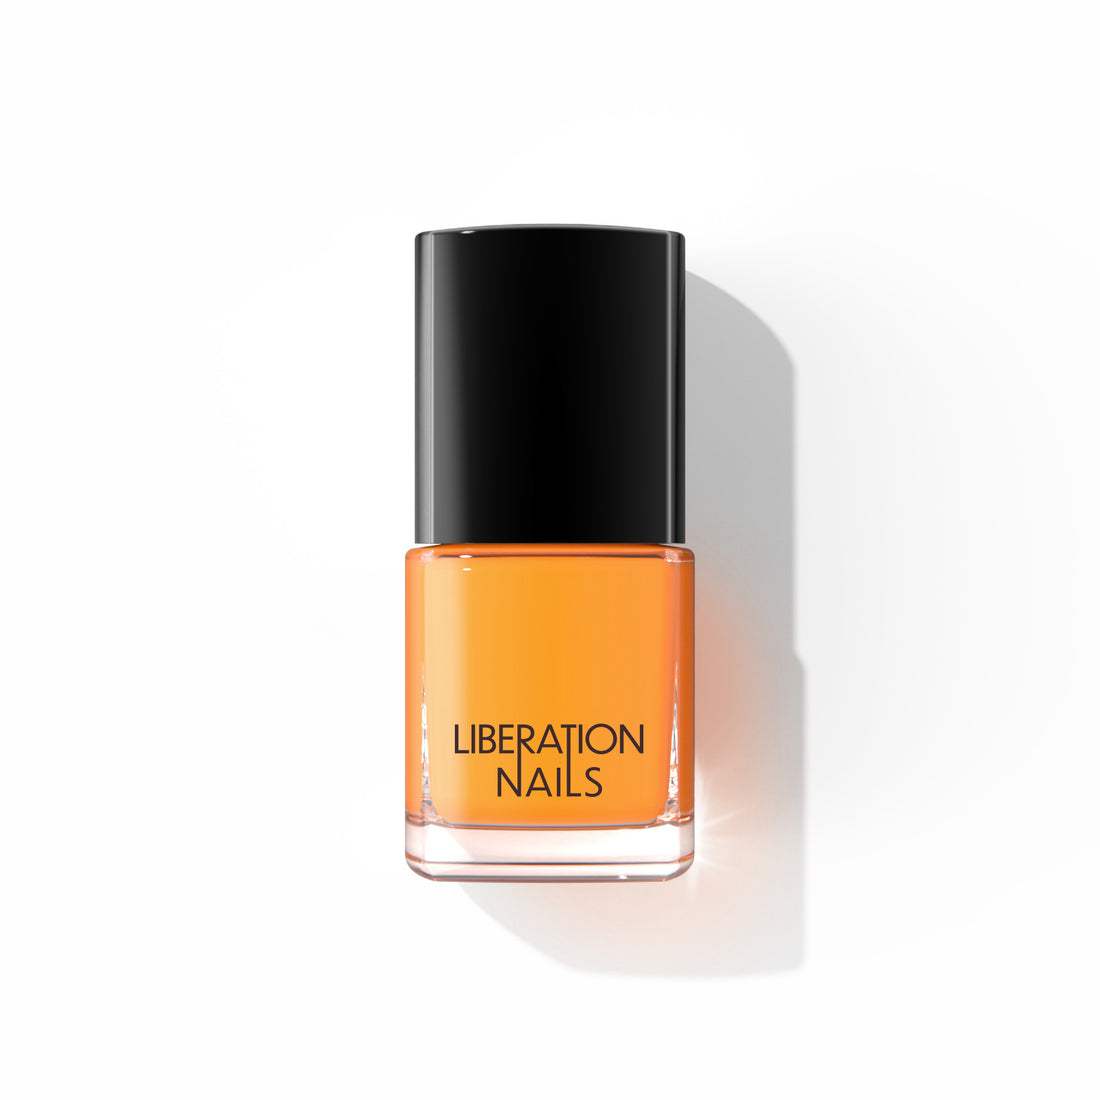 A bottle of Liberation Nails nail polish in an orangey yellow color, Goodyear.